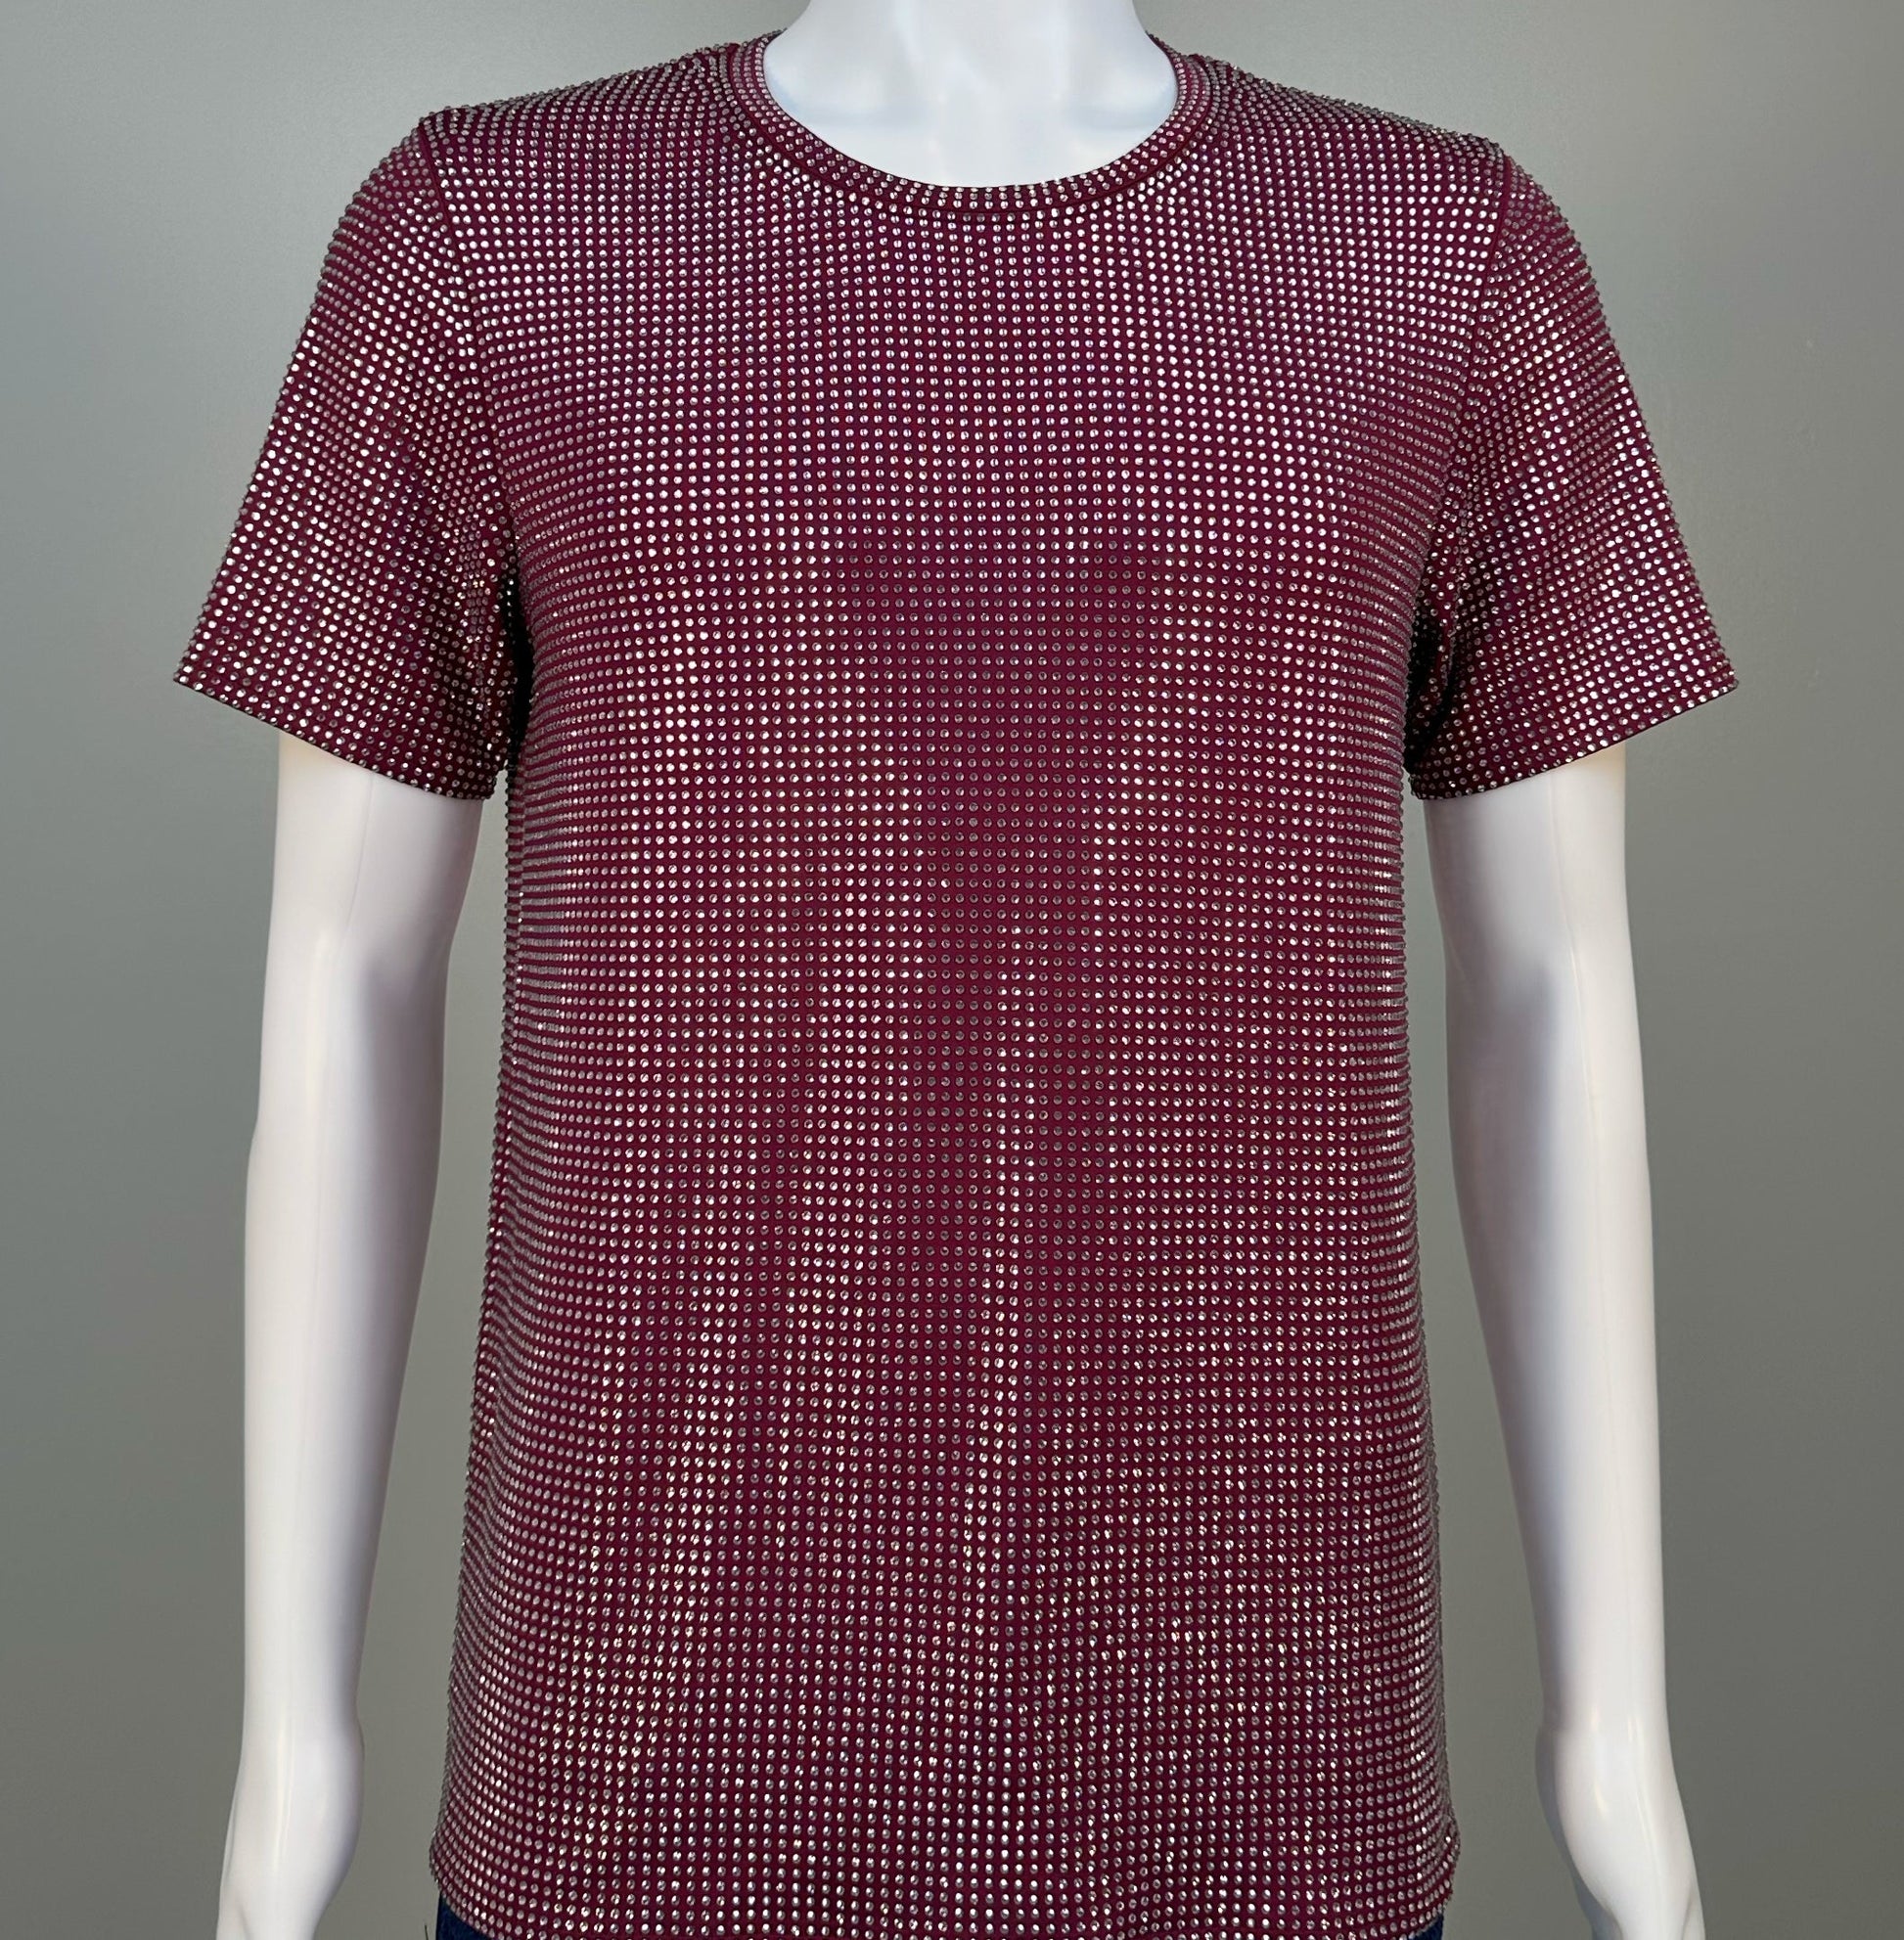 Photo of a sparkling Clear Crystals on Purple Fabric T-shirt featuring thousands of crystal rhinestones.